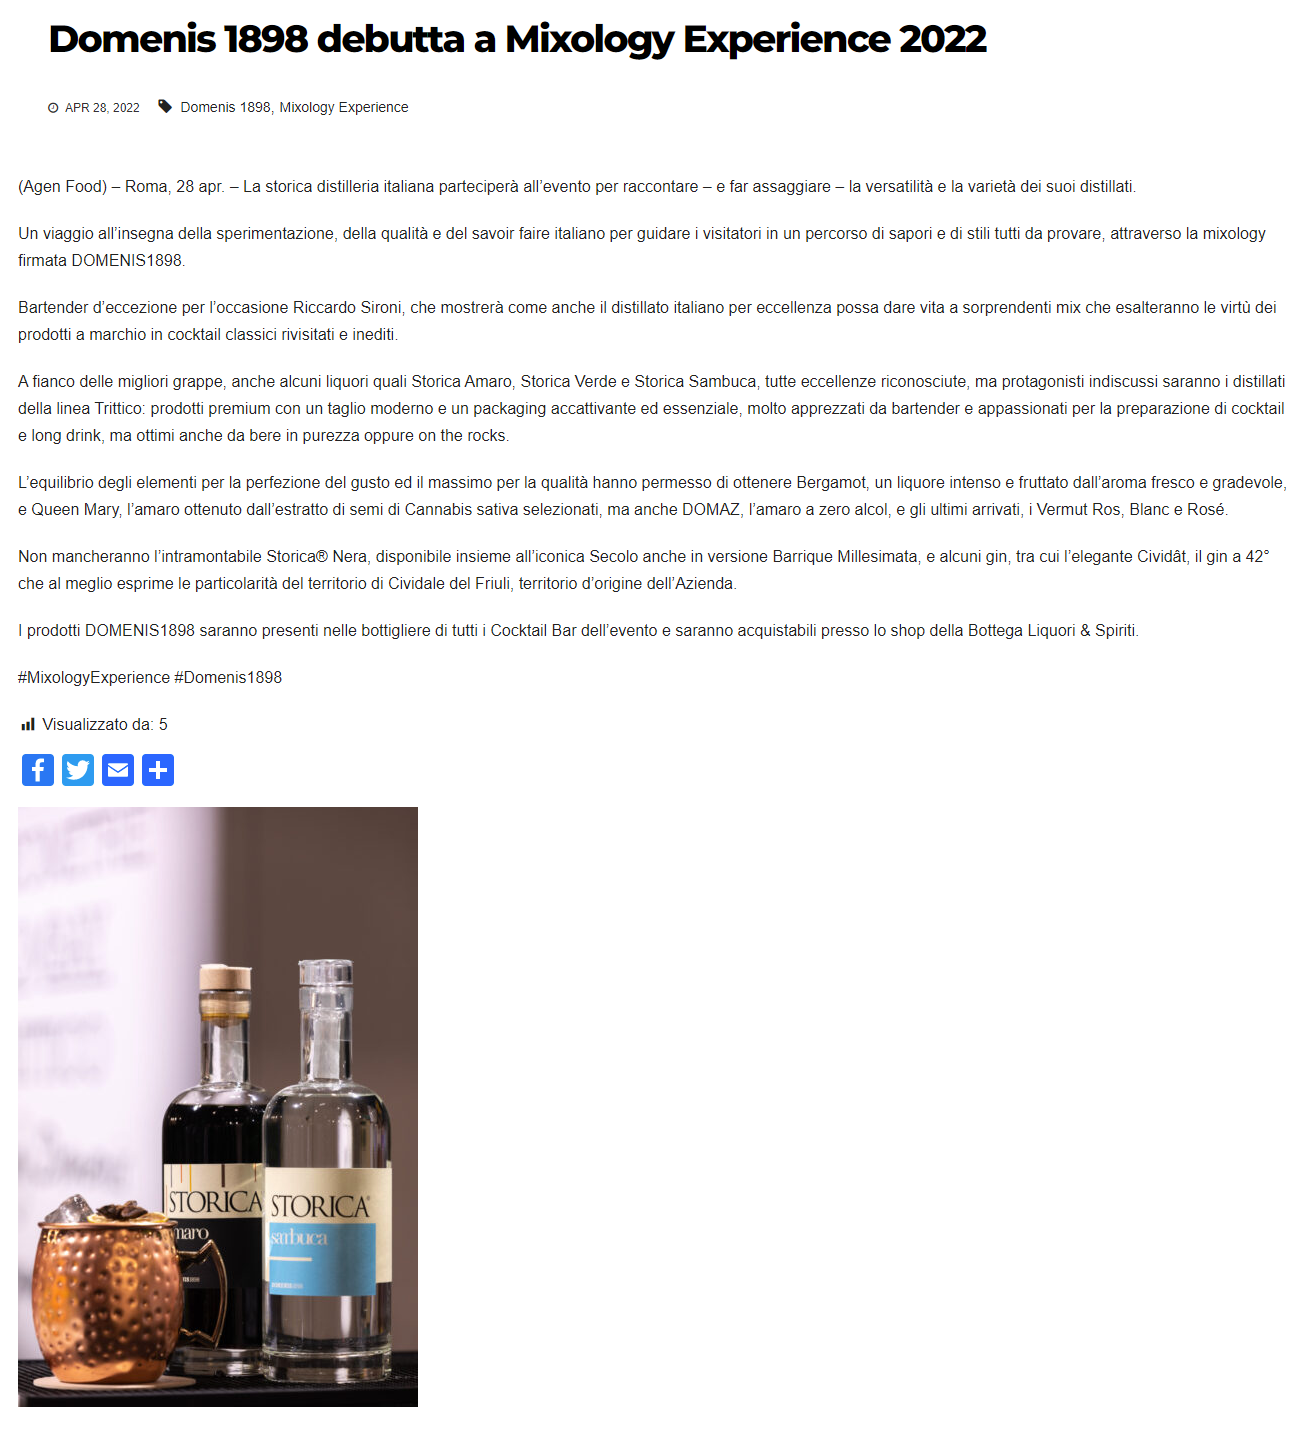 2022 aprile 28: Agenfood.it – DOMENIS1898 debutta a Mixology Experience 2022